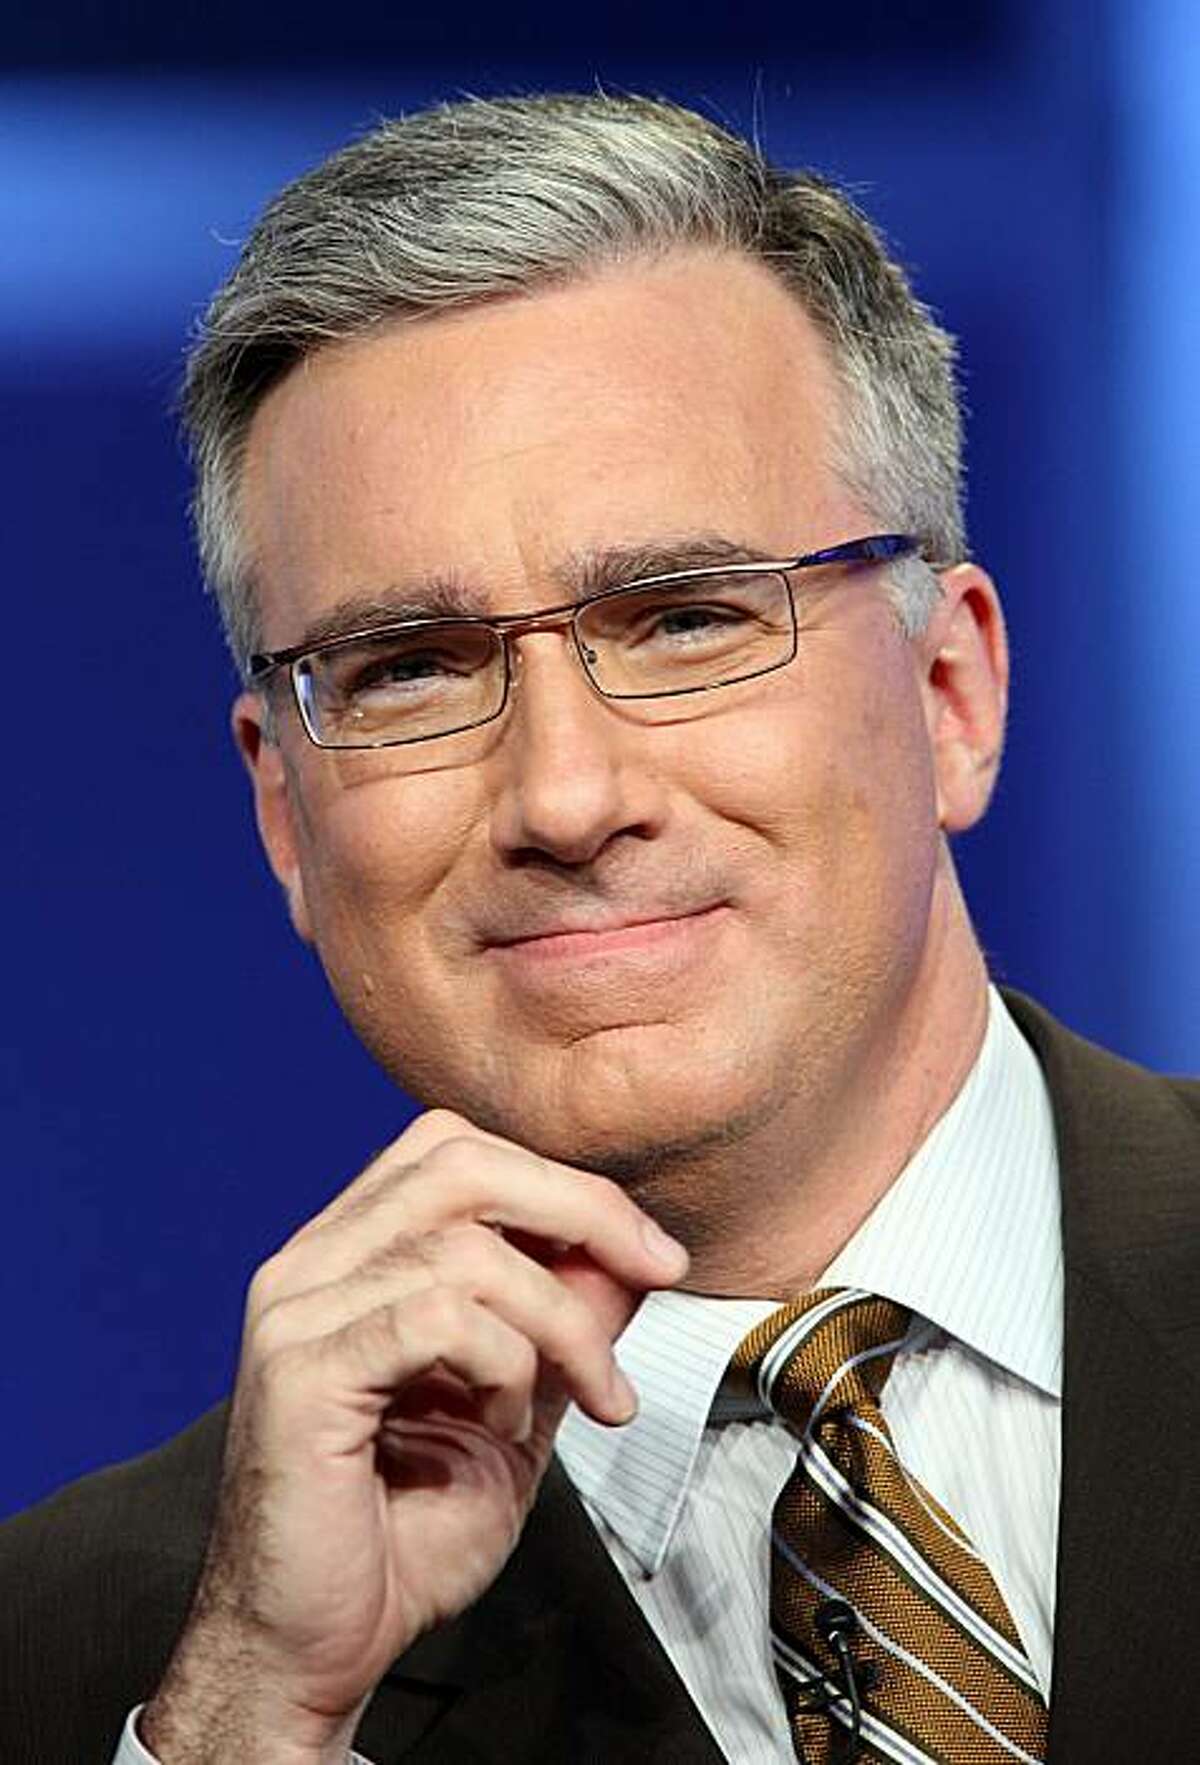 BEVERLY HILLS, CA - JULY 21: (FILE PHOTO) Co-host Keith Olbermann of "Sunday Night Football" speaks during the NBC Universal portion of the Television Critics Association Press Tour held at the Beverly Hilton hotel on July 21, 2008 in Beverly Hills, California. Keith Olbermann, who departed the prime time show he hosted on MSNBC in January, announced on February 8, 2011 that he will host a prime time program on Current TV, a cable channel co-founded by Al Gore.